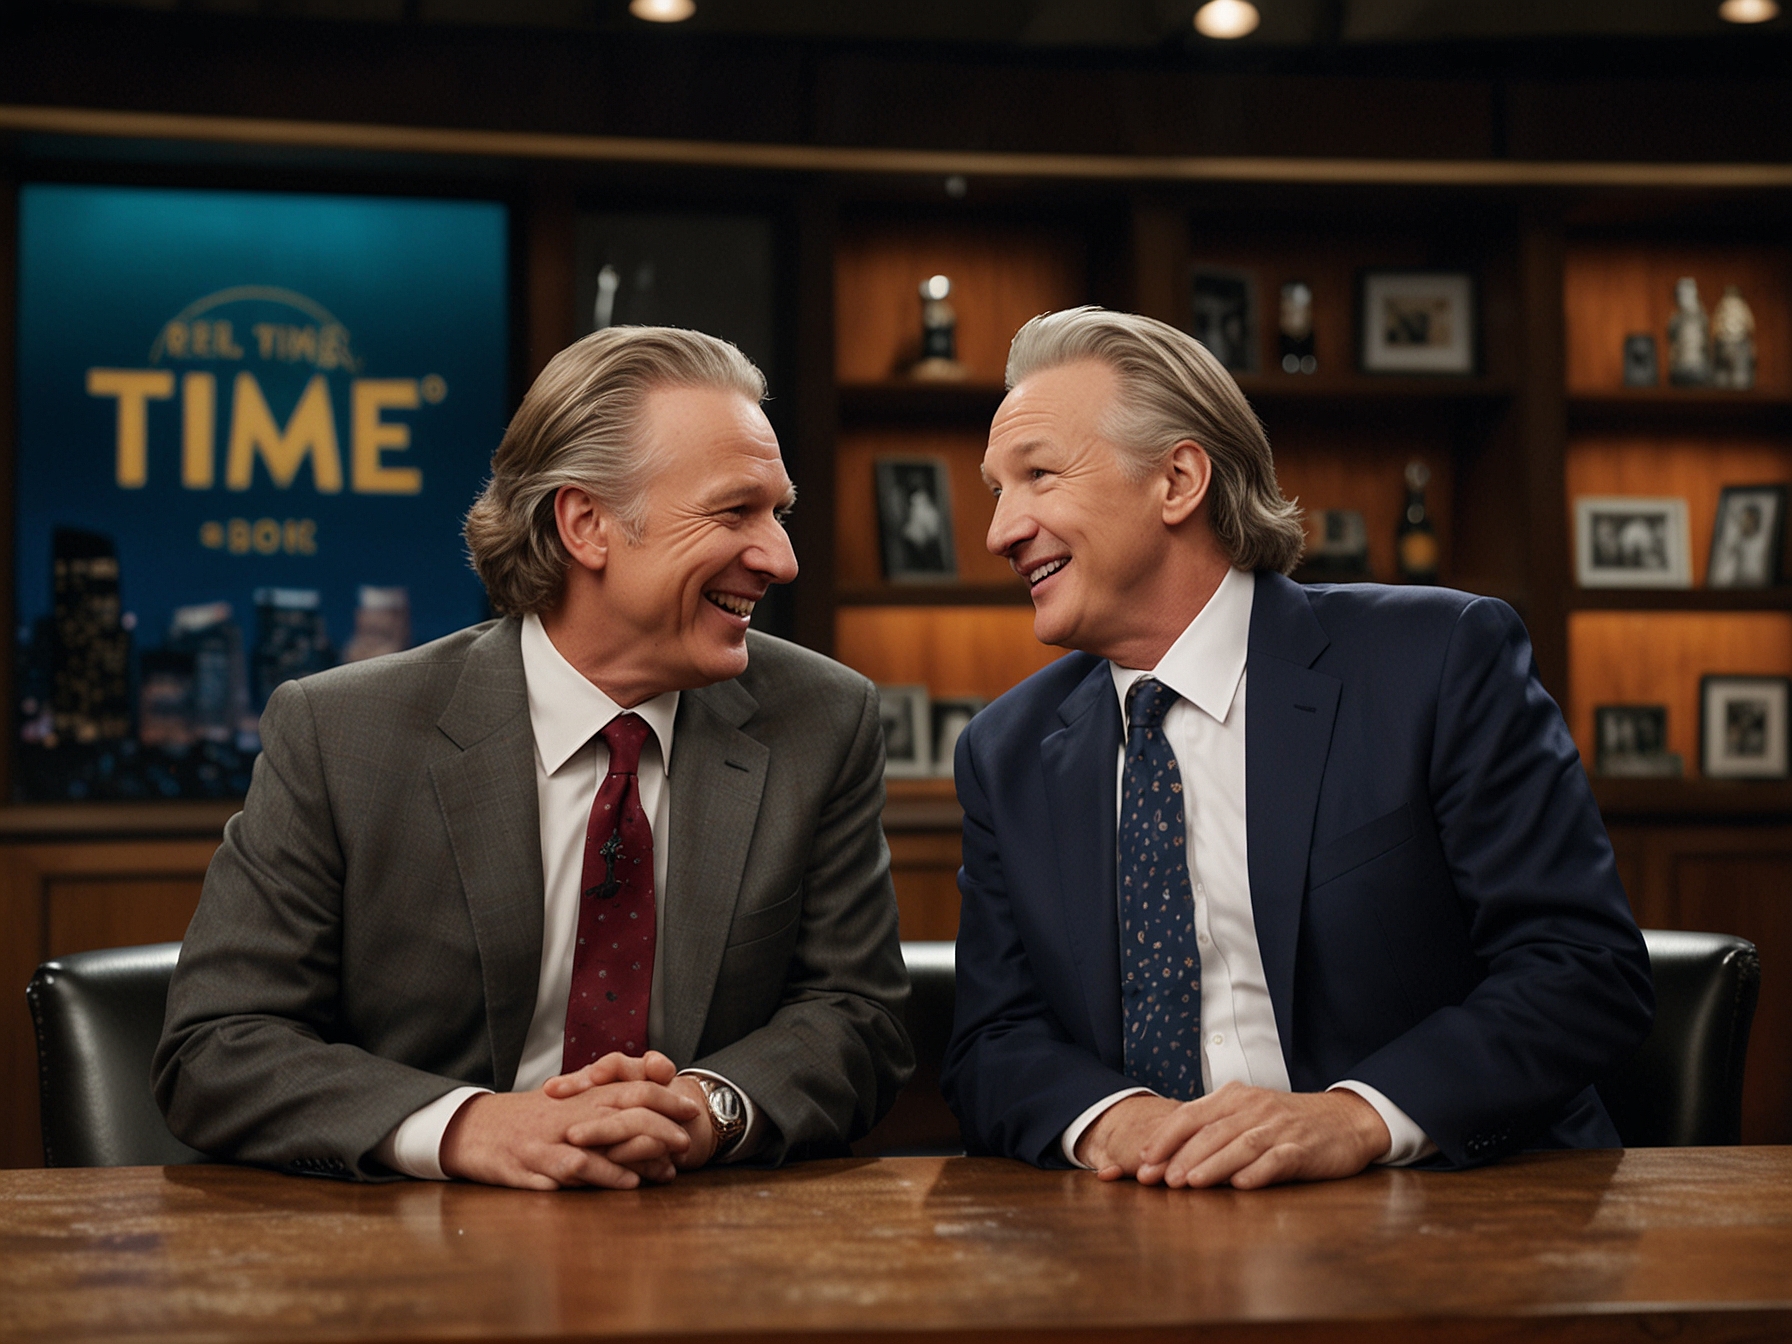 Bill Maher and Jiminy Glick share a laugh on the set of 'Real Time,' showcasing their dynamic comedic chemistry. The set design, simple yet nostalgic, provides a perfect backdrop for their hilarious interaction.